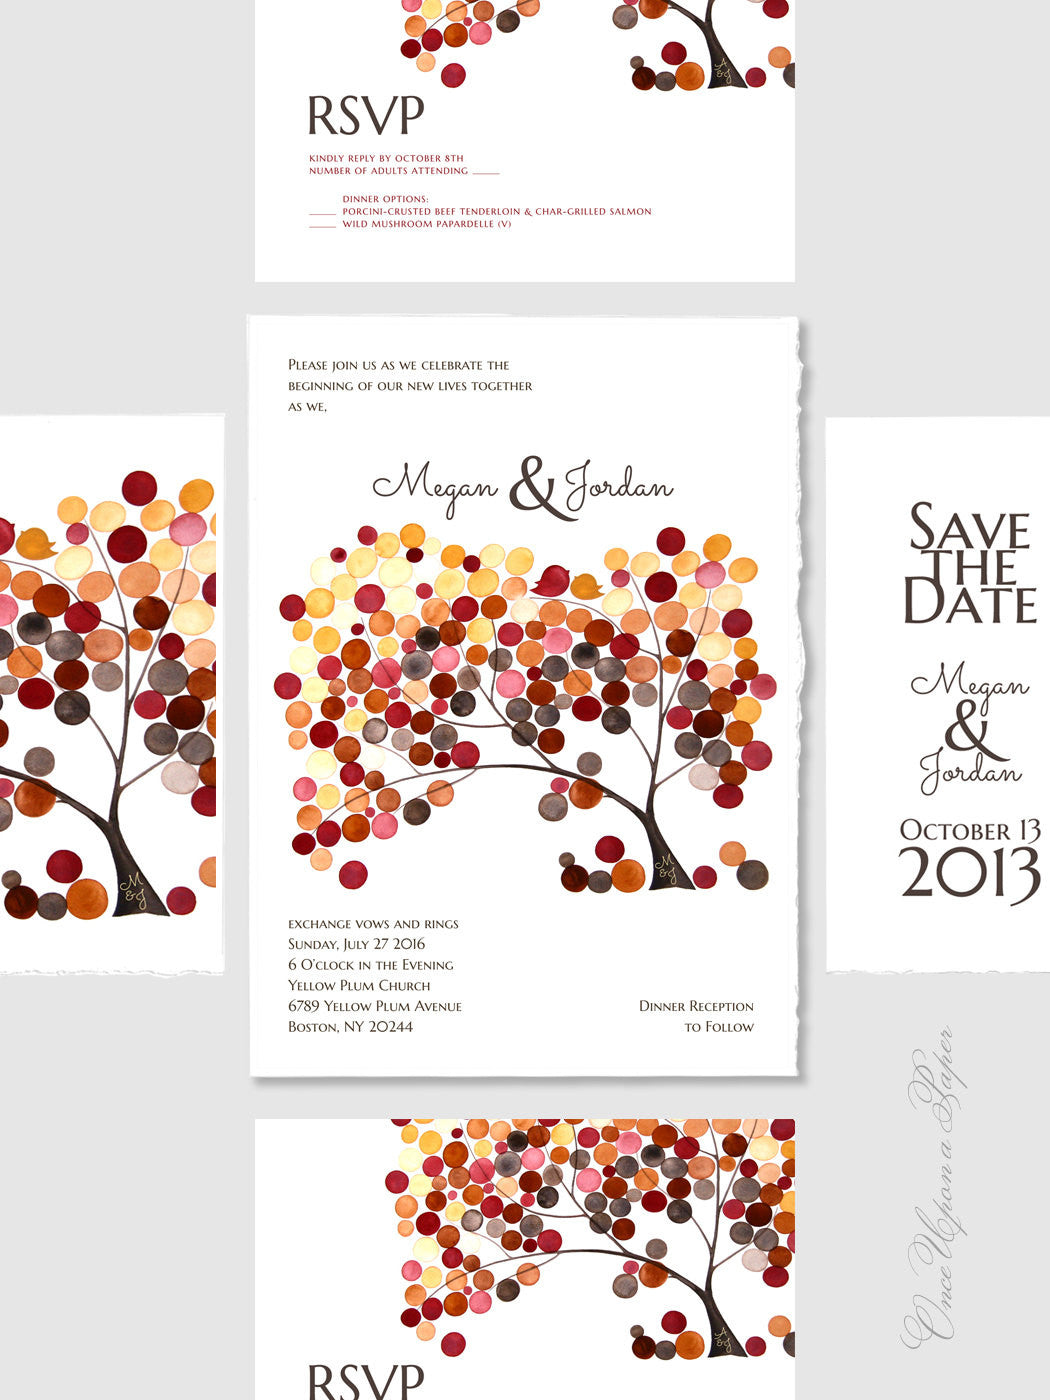 DIY Printable Custom Wedding Card Package - Save the Date, Wedding Invitations, RSVP, Thank You Cards